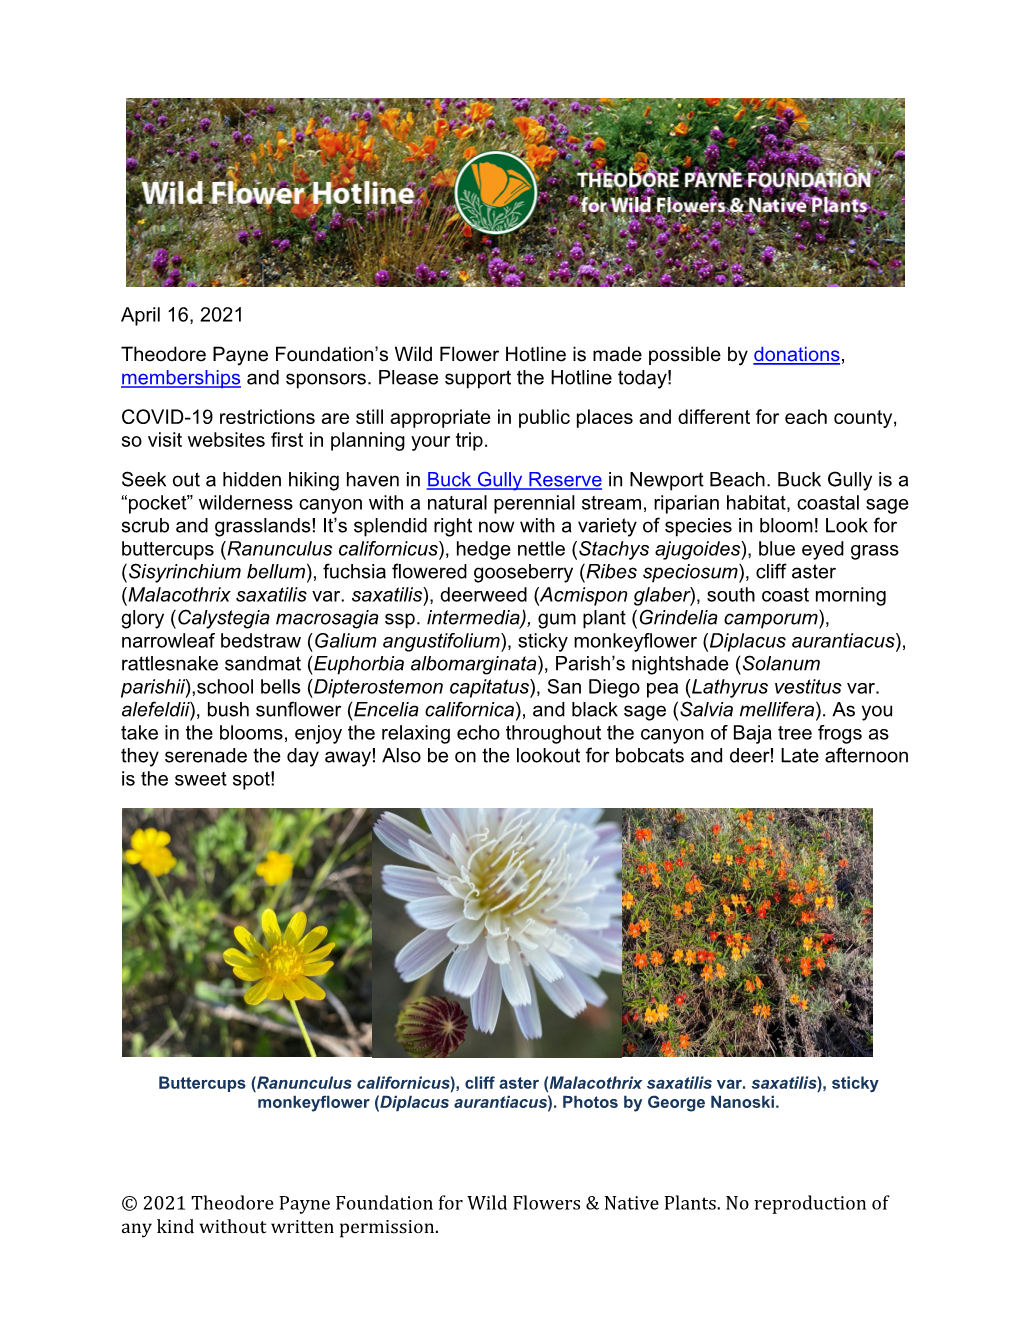 © 2021 Theodore Payne Foundation for Wild Flowers & Native Plants. No